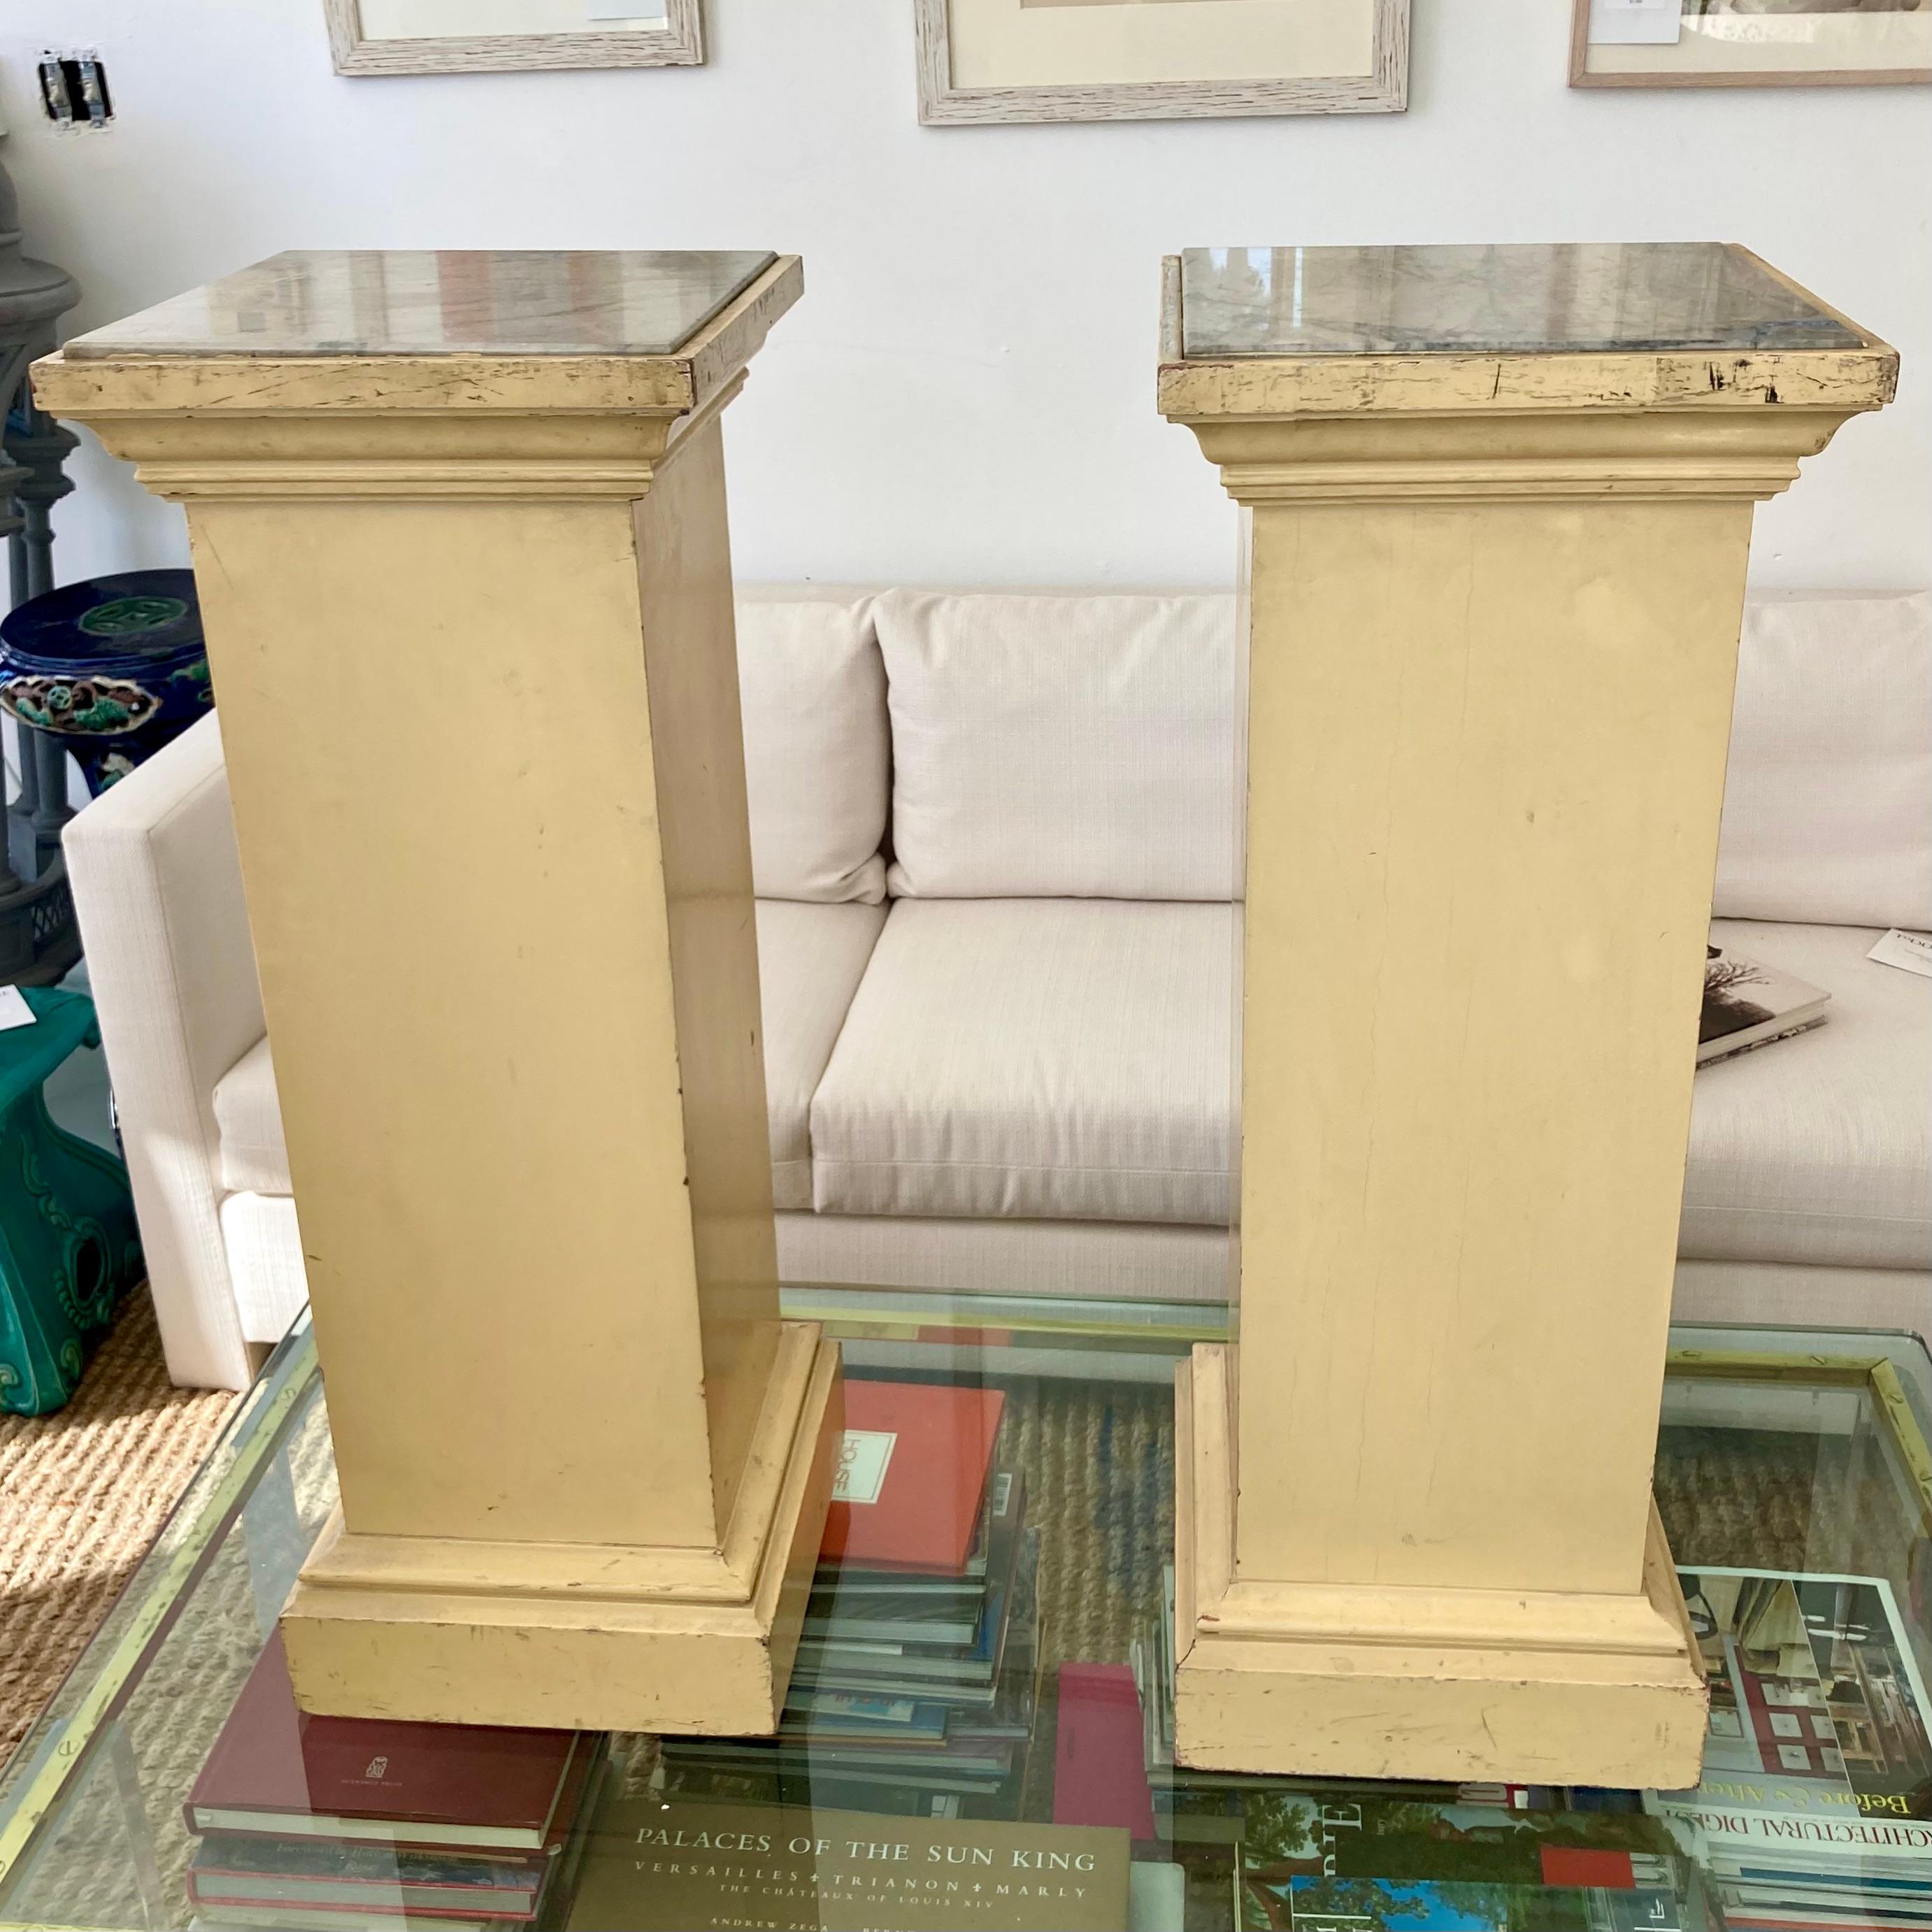 Beautiful pair of French pedestals with marble tops. Great addition to your architectural French inspired home and interiors.